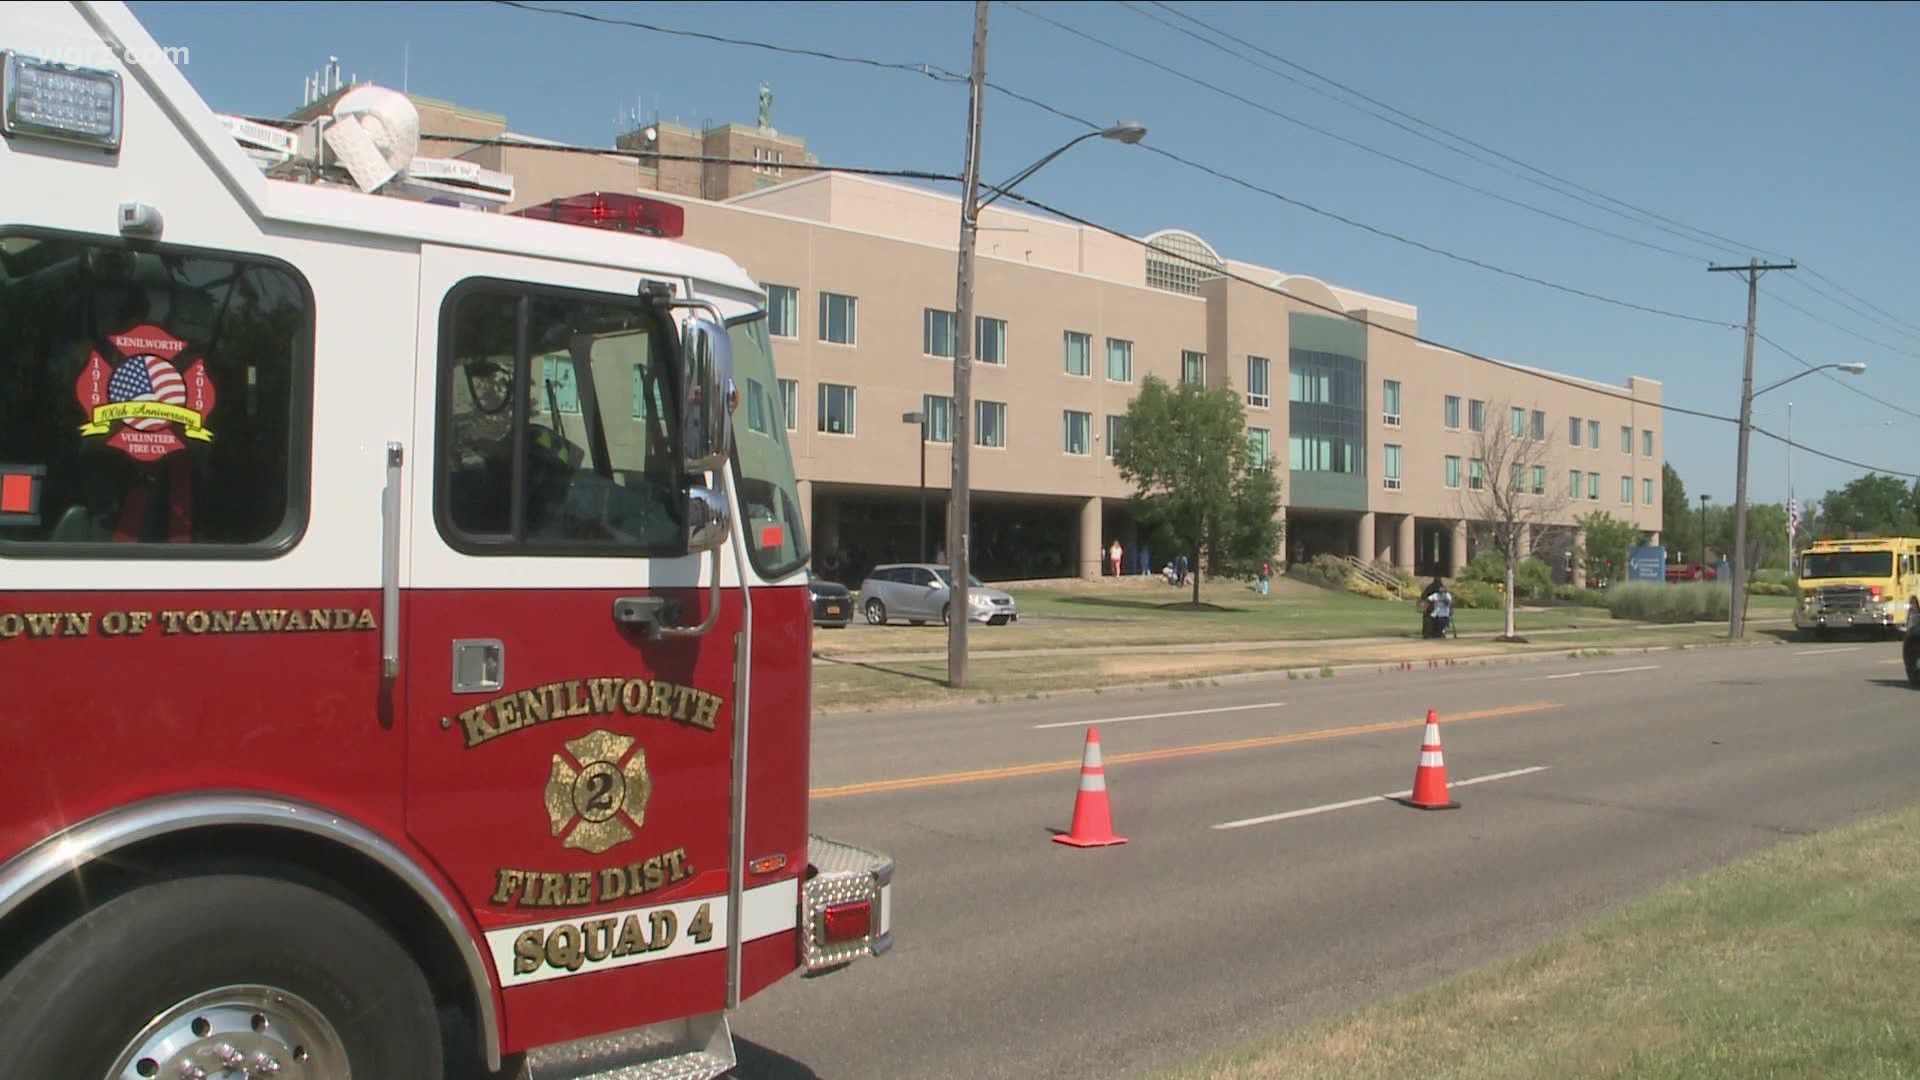 Small fire on roof of Kenmore Mercy hospital